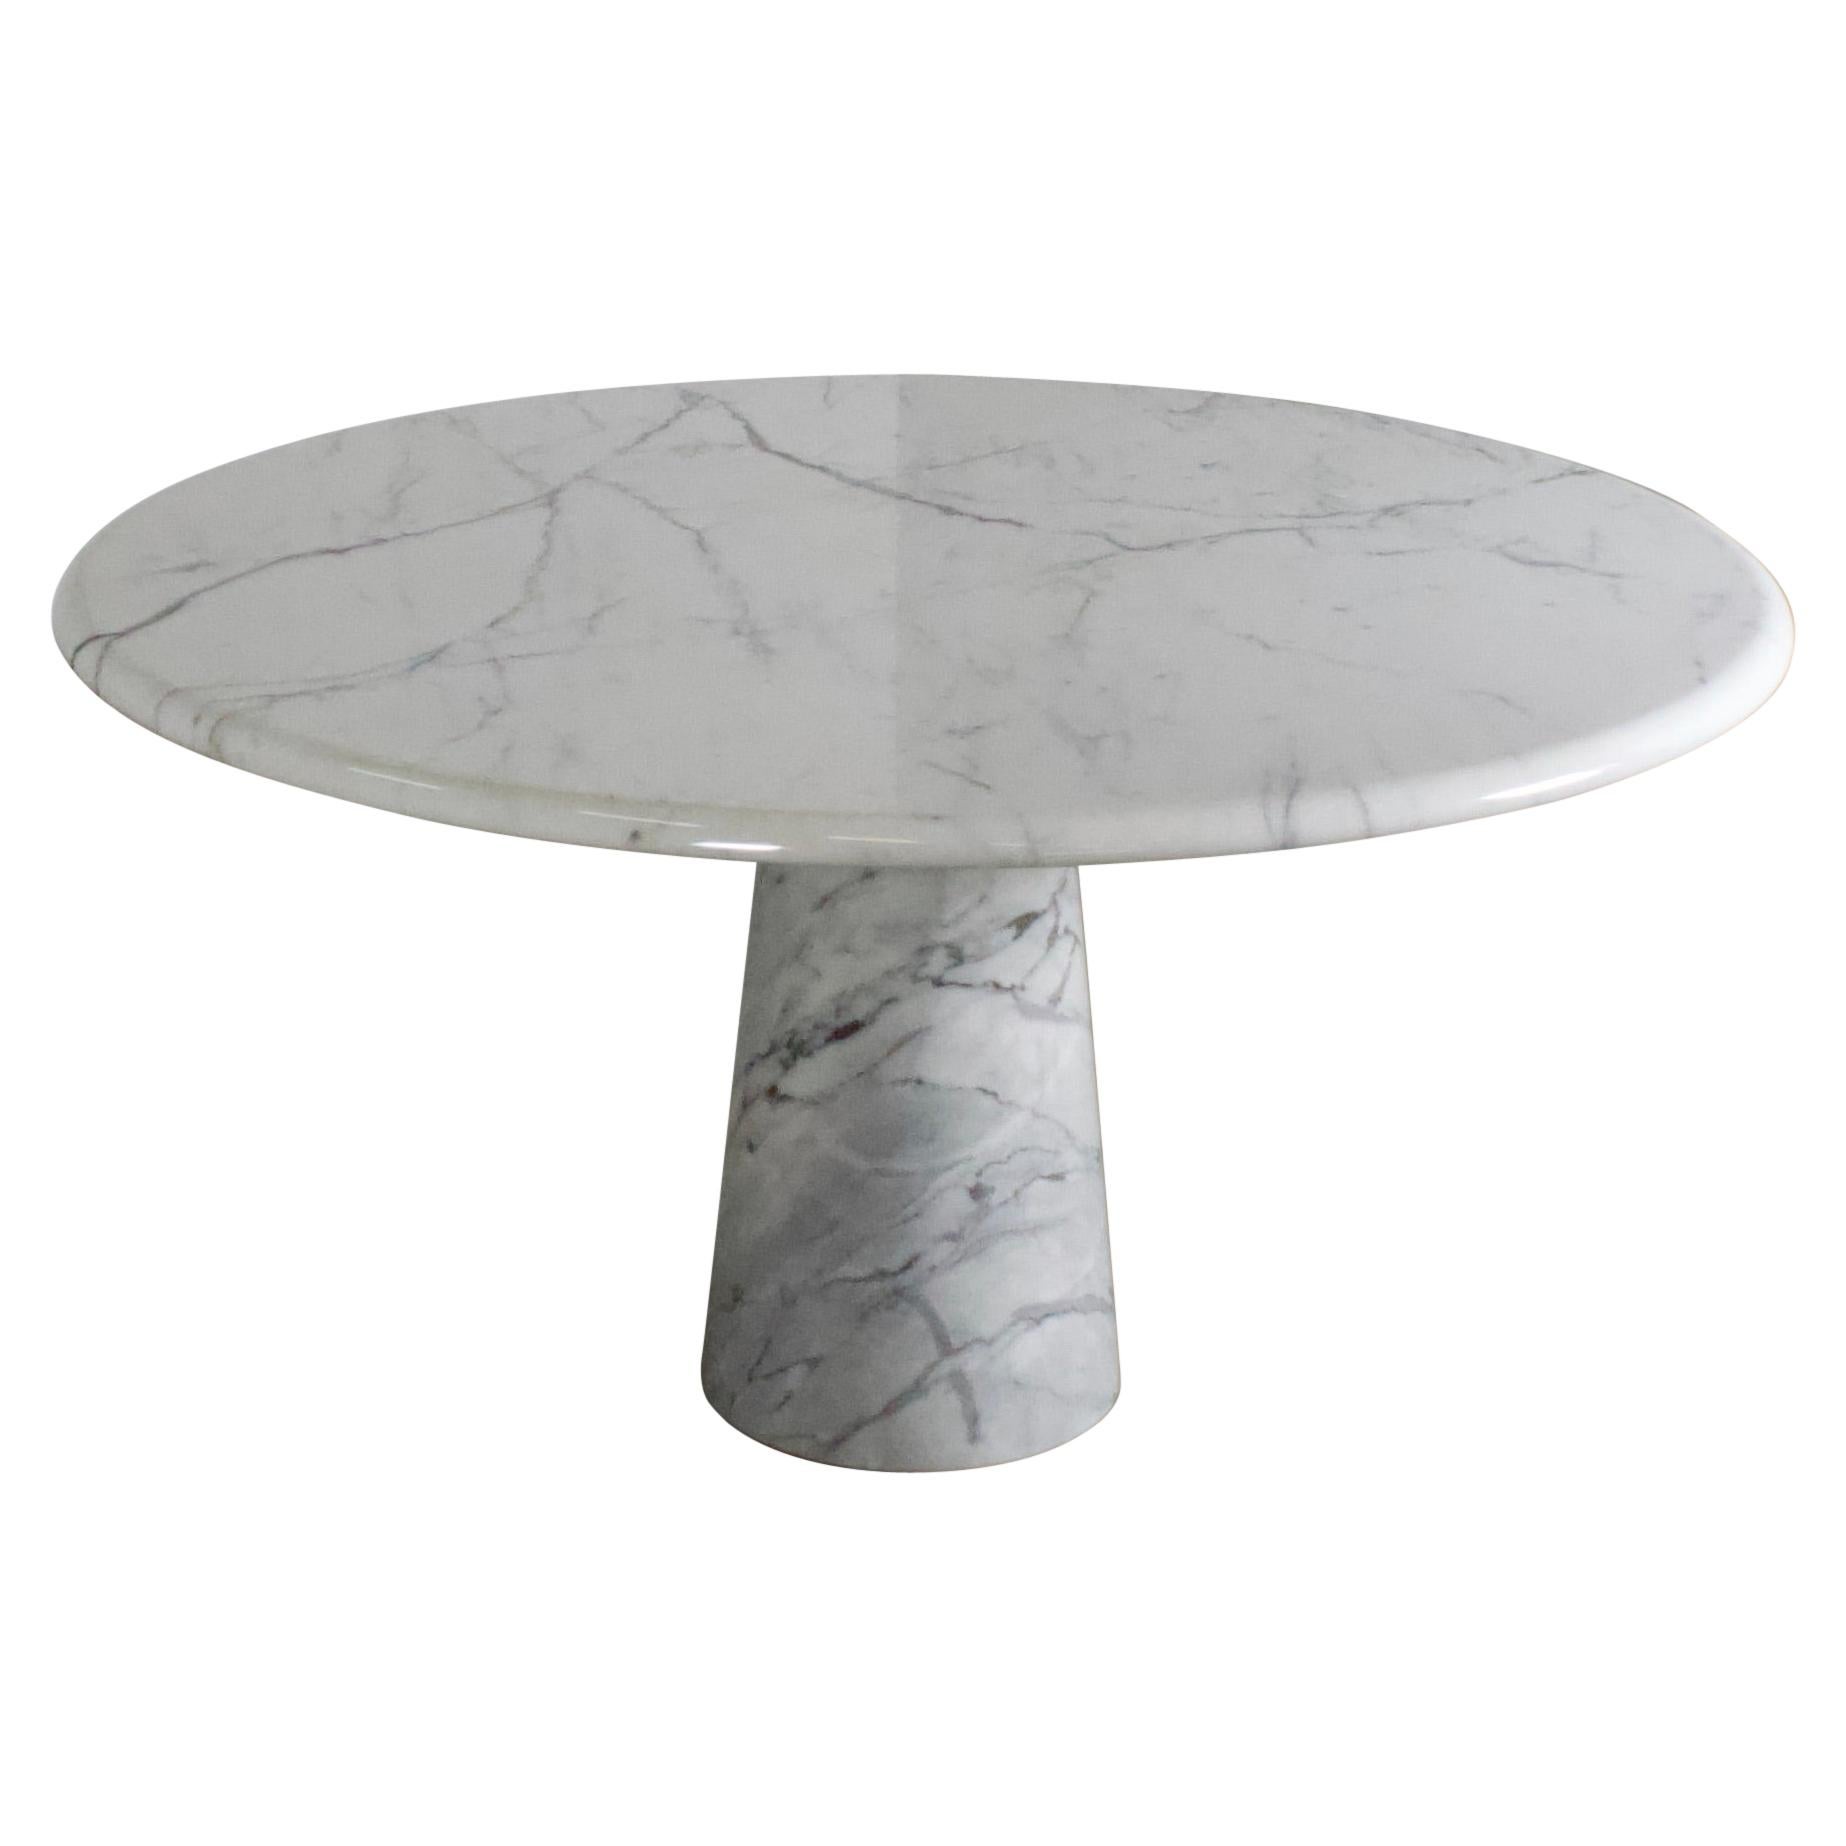 Round Carrara Marble Pedestal Dining Table, Italy, 1970s